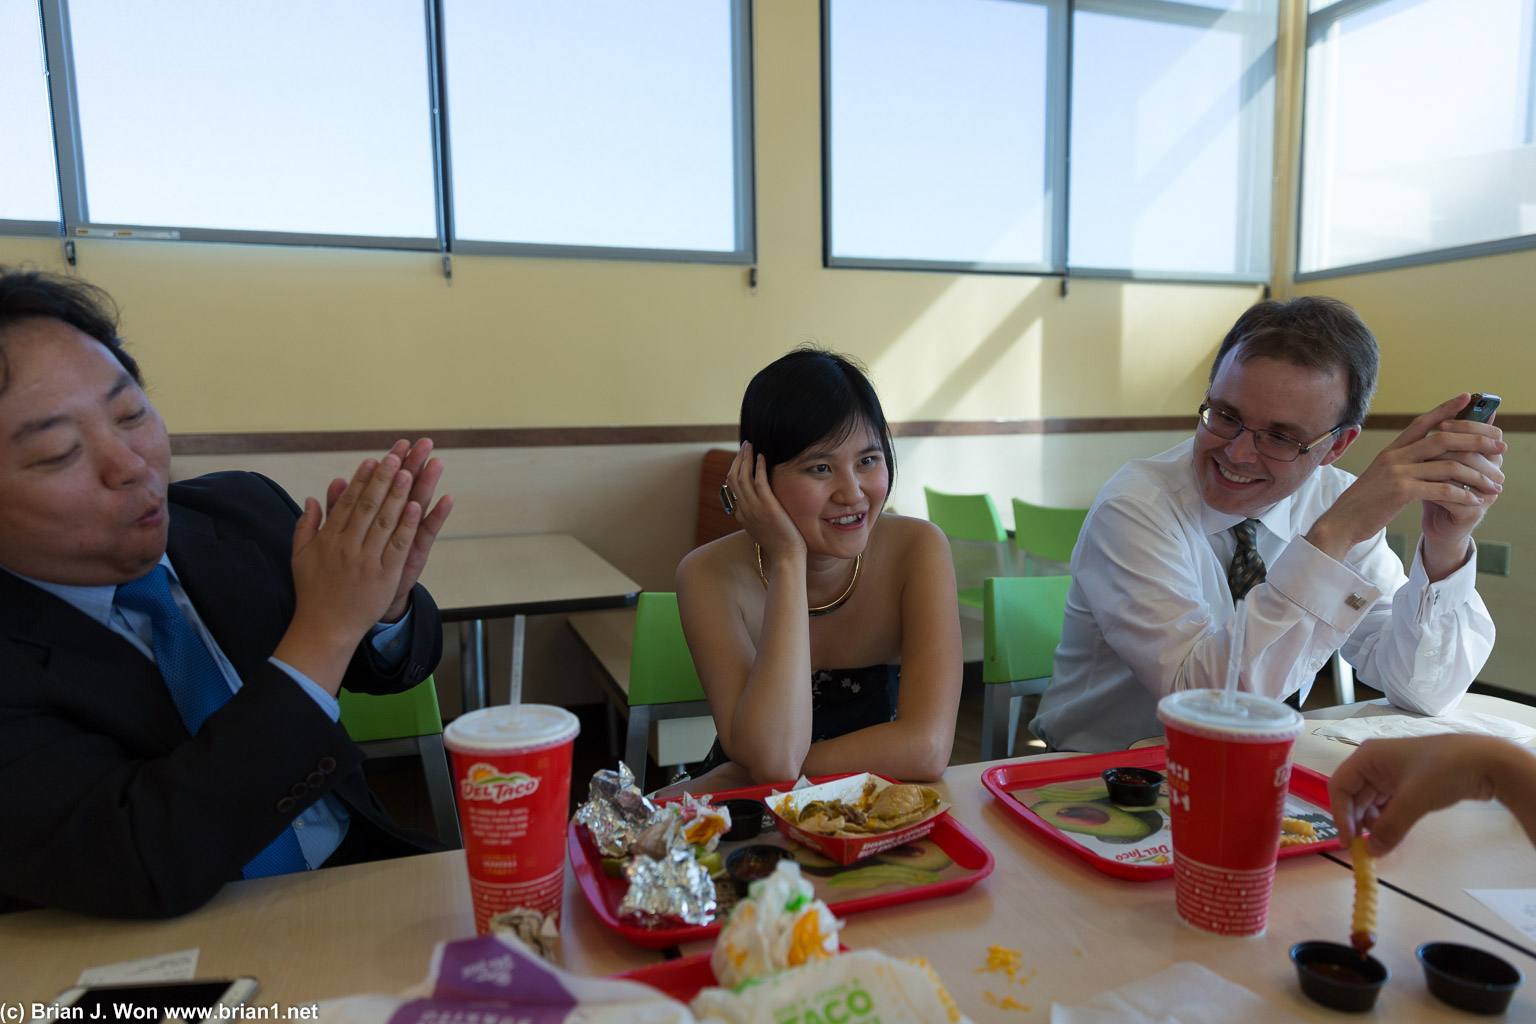 Fooding/break time at Del Taco in-between ceremony and reception.